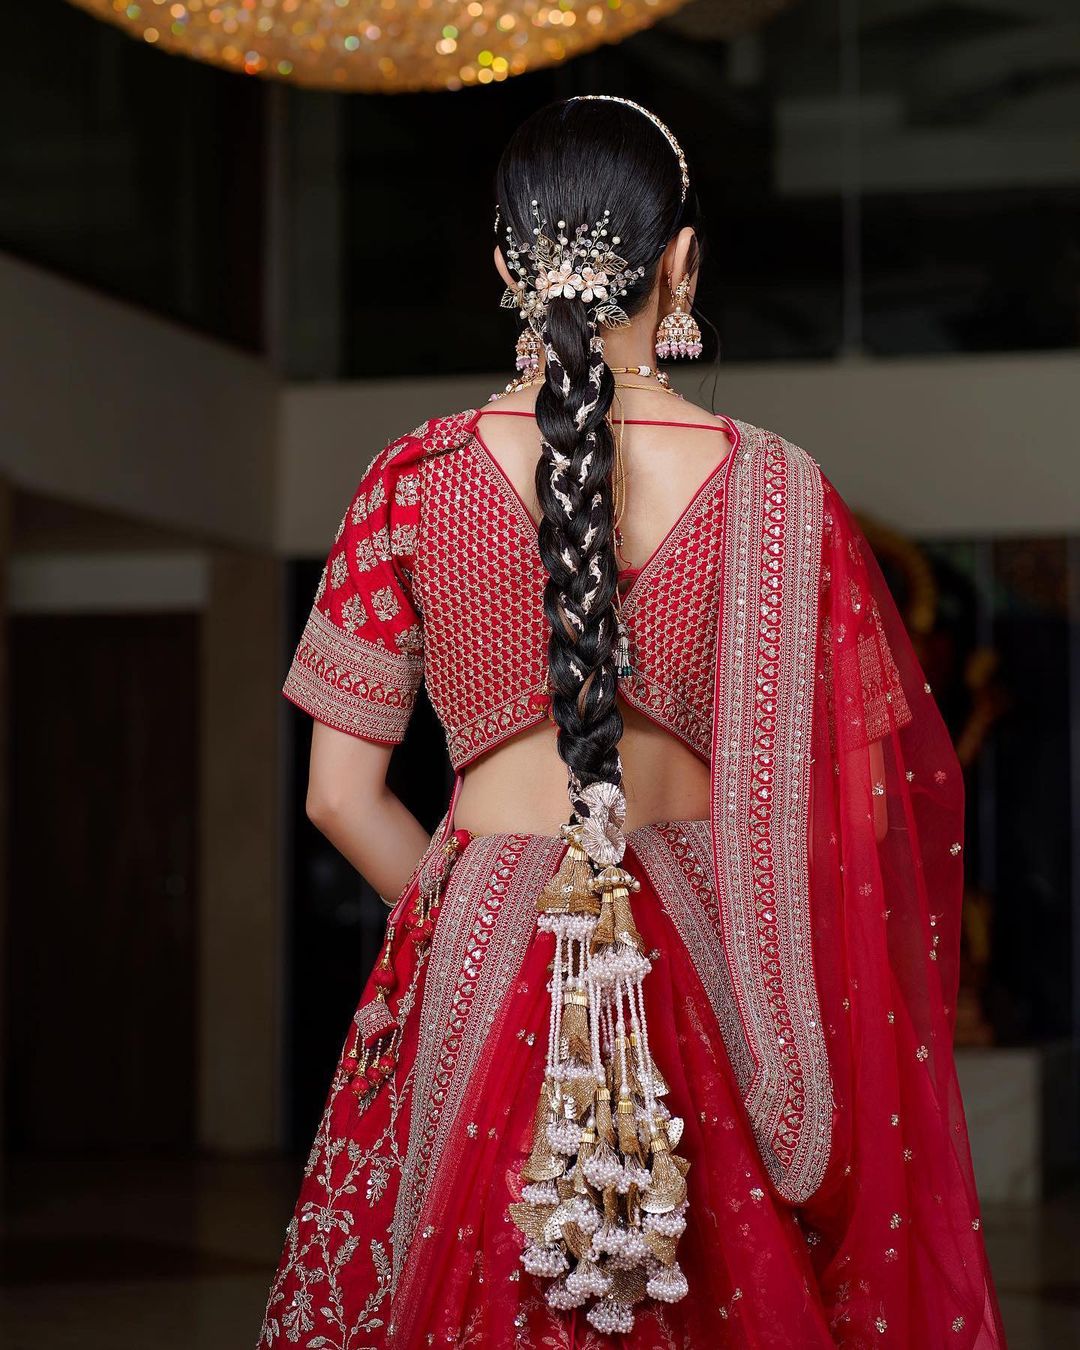 unique open hair hairstyle for lehenga dress - YouTube-gemektower.com.vn